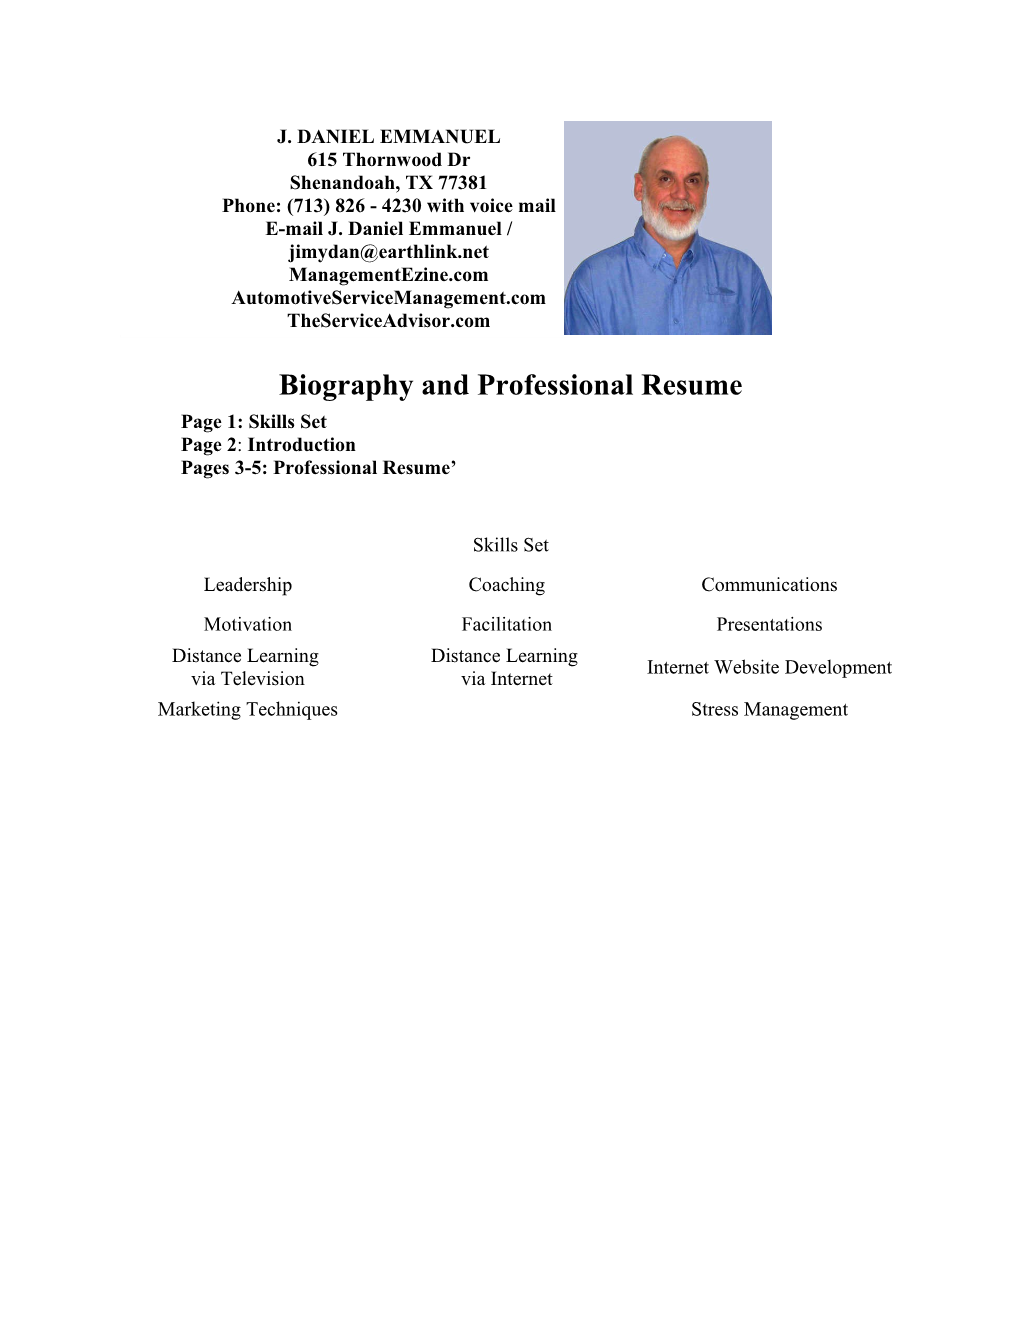 Biography and Professional Resume